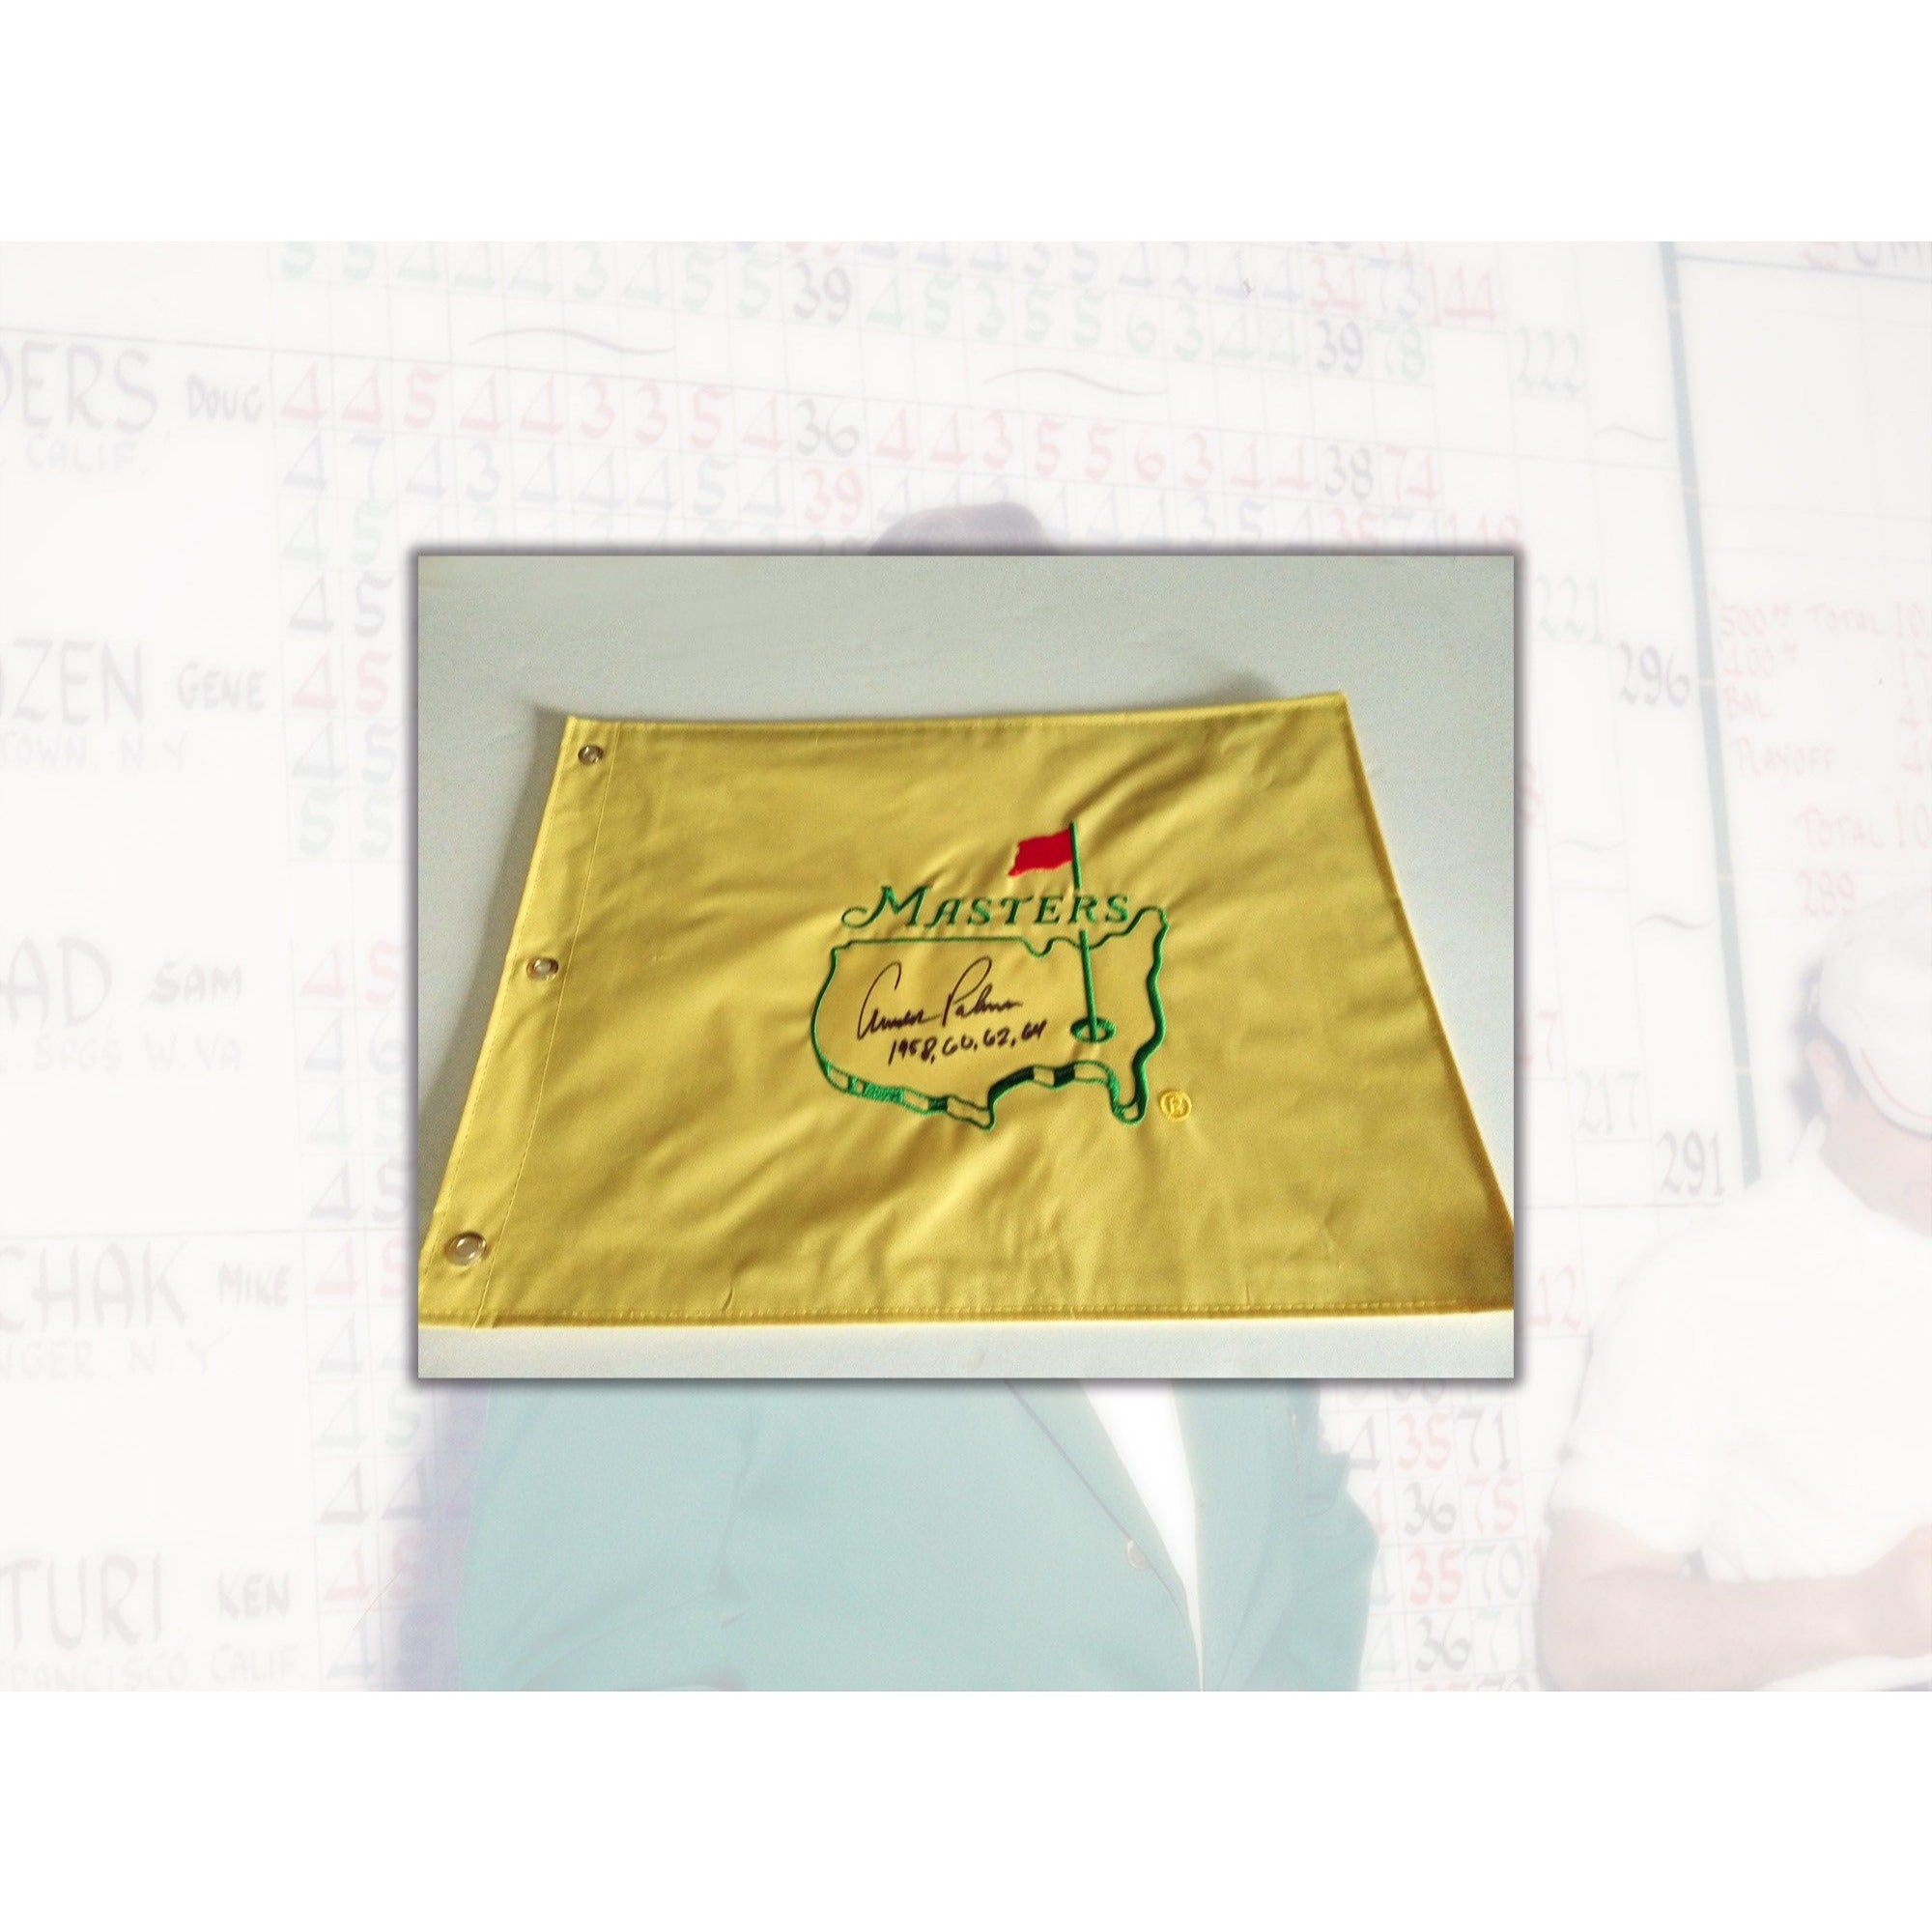 Arnold Palmer signed and inscribed Masters Golf flag with proof